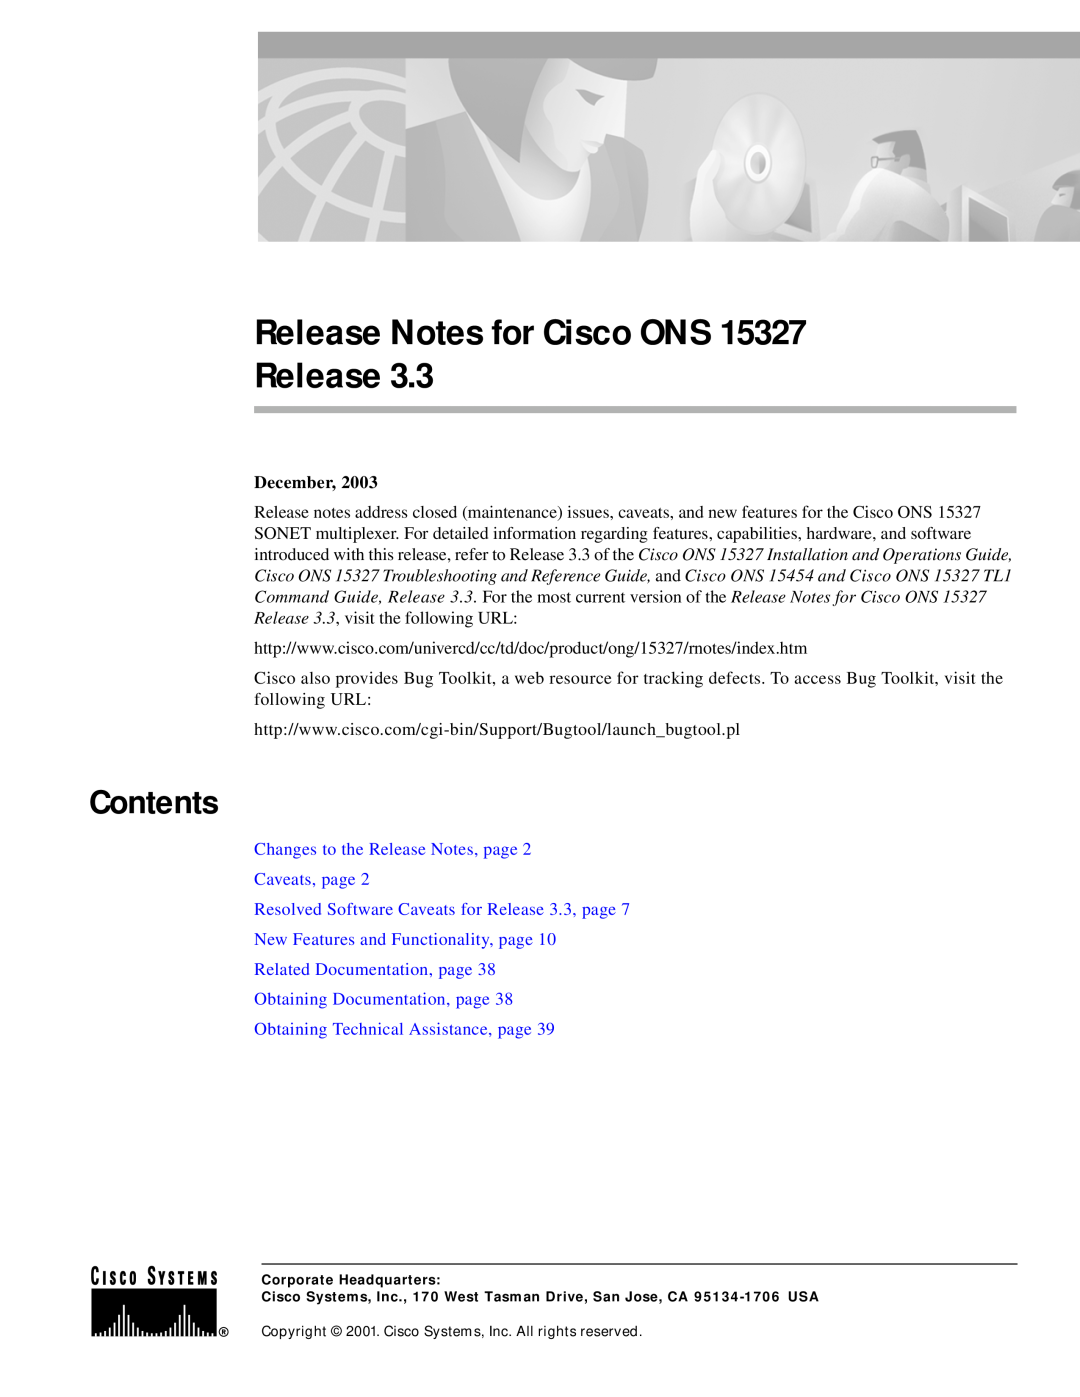 Cisco Systems ONS 15327 manual Contents, Changes to the Release Notes, page Caveats, page, December 